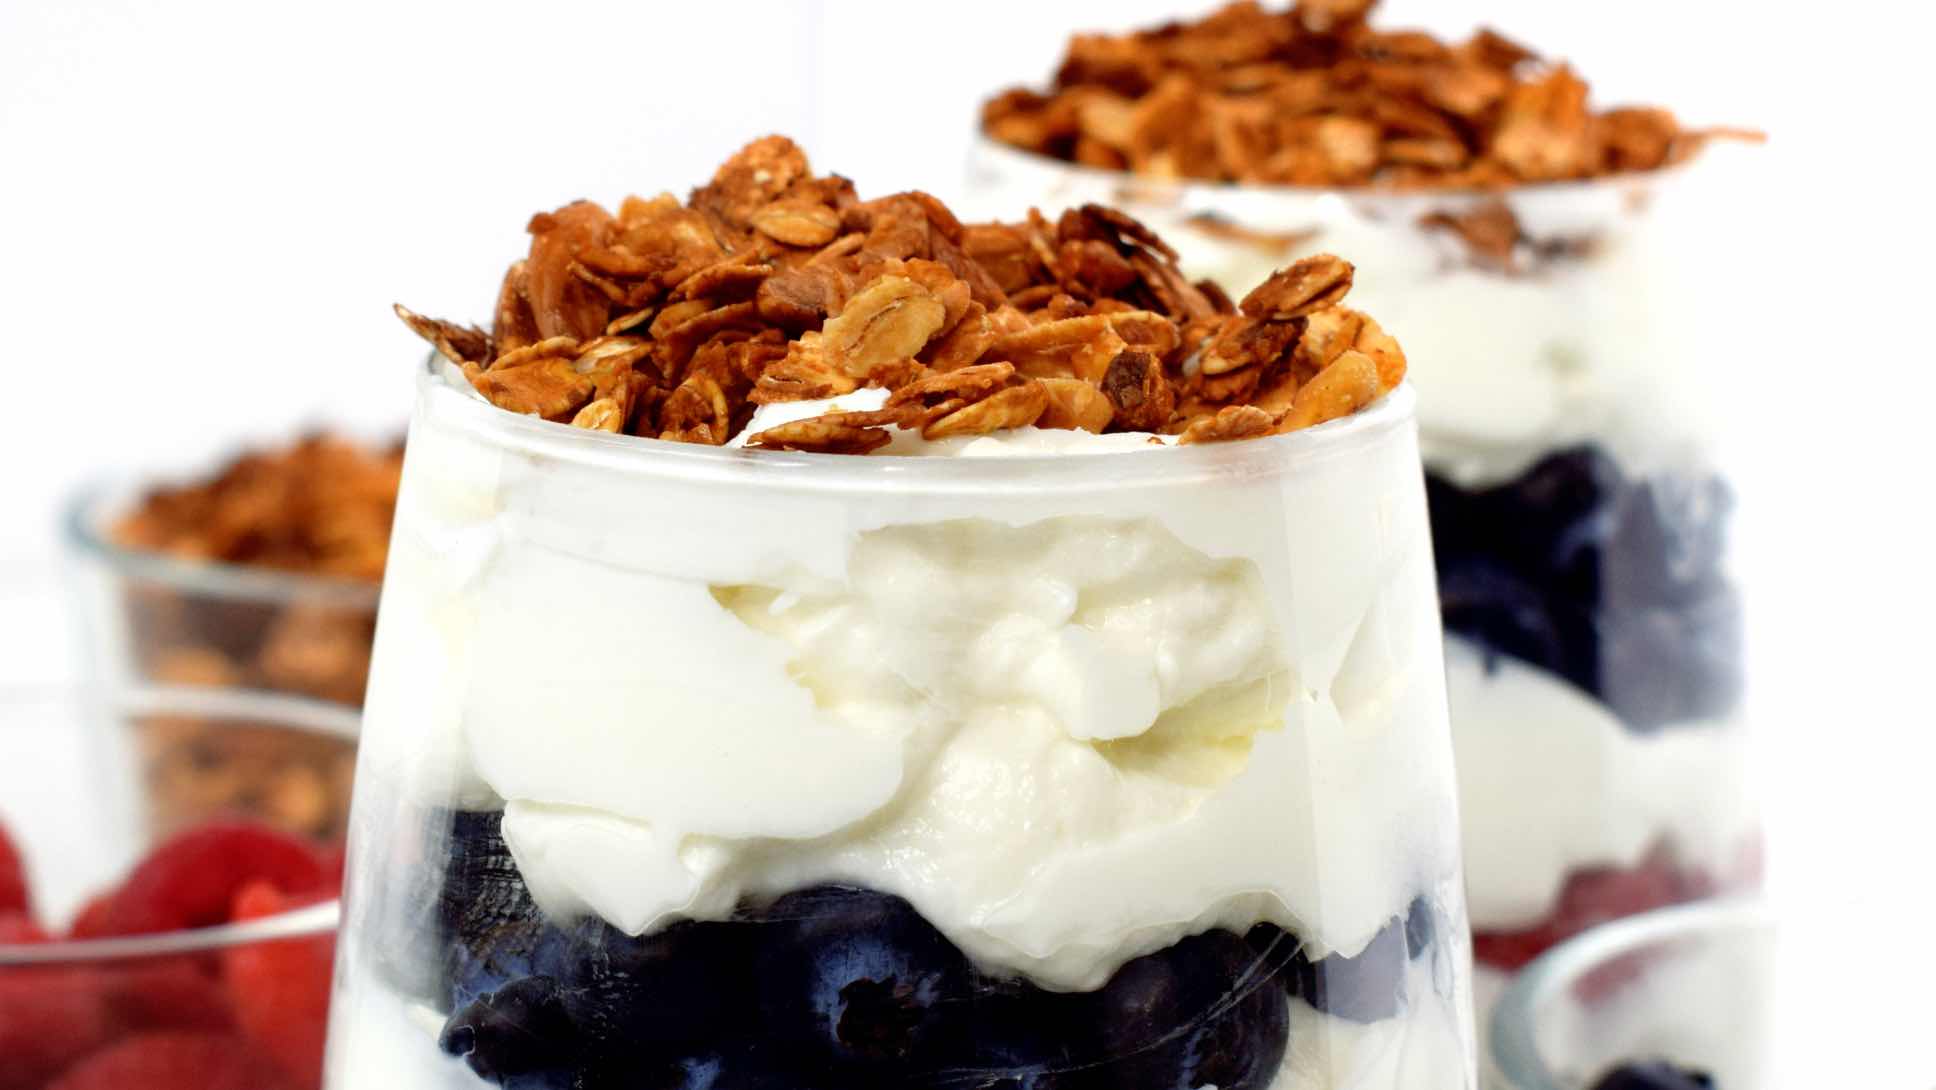 Two cups of a parfait featuring layers of yogurt, red and blue berries, and a topping of granola.